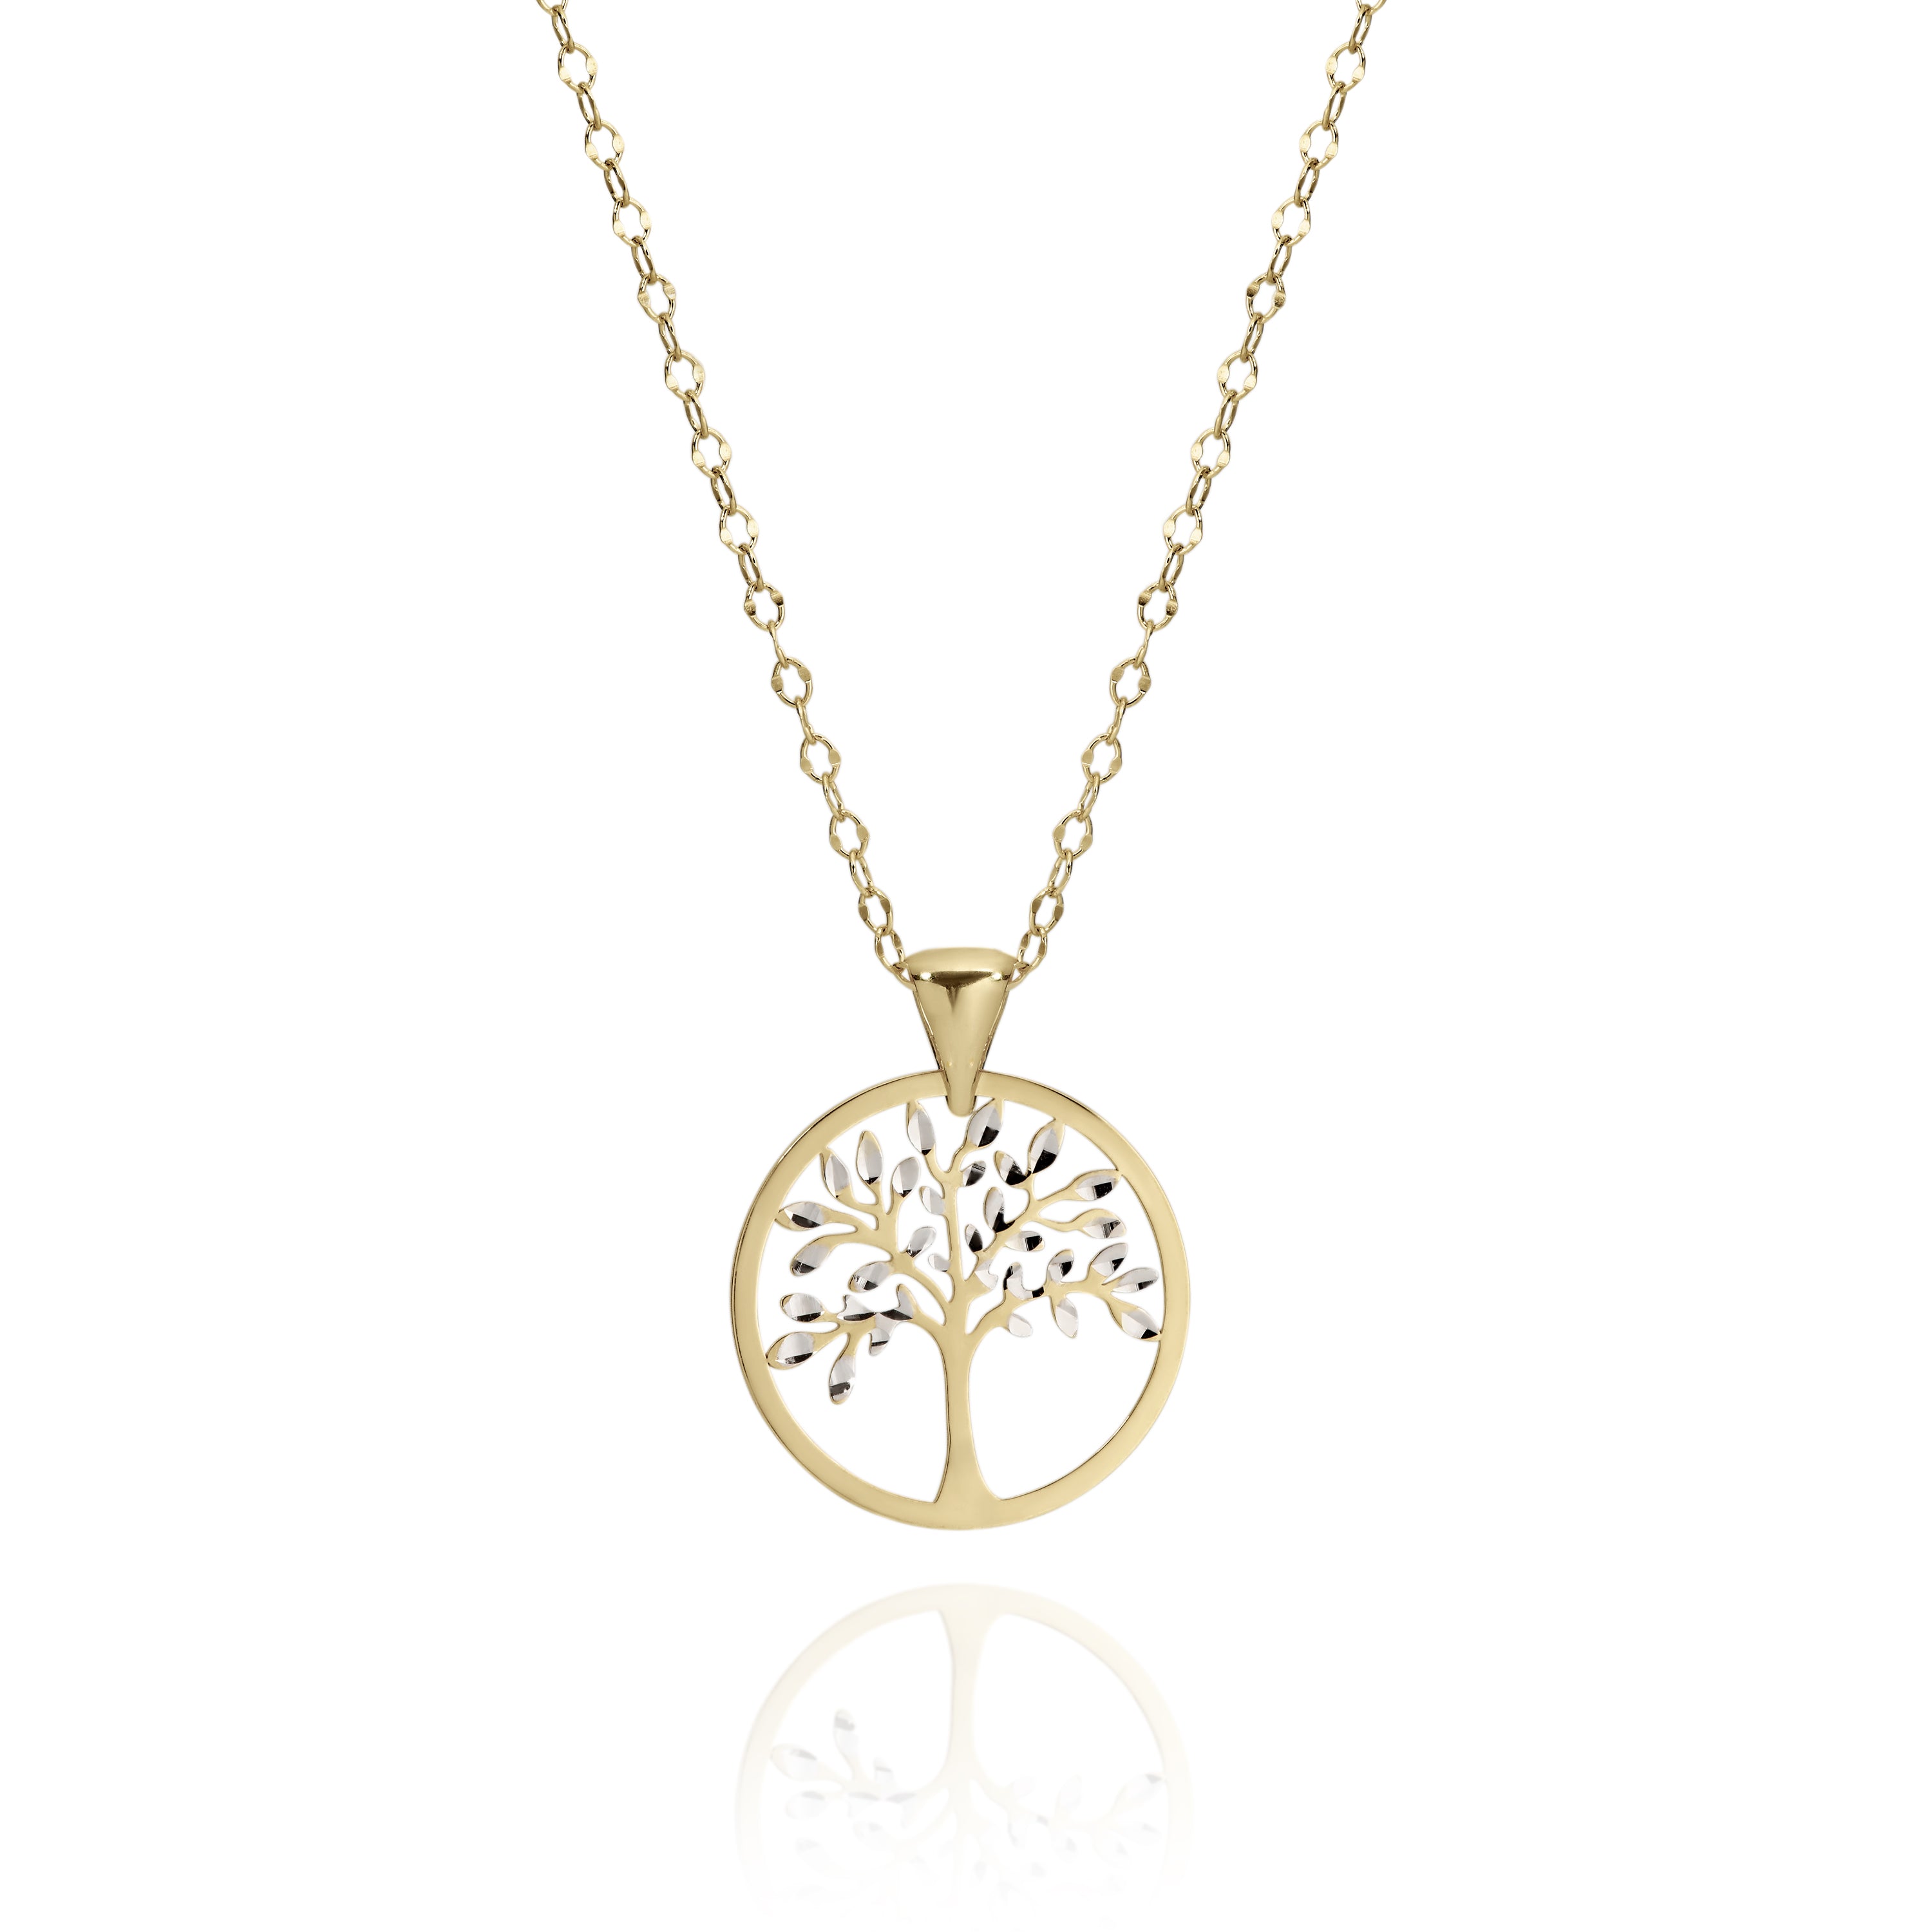 9ct gold tree of life necklace 45cm